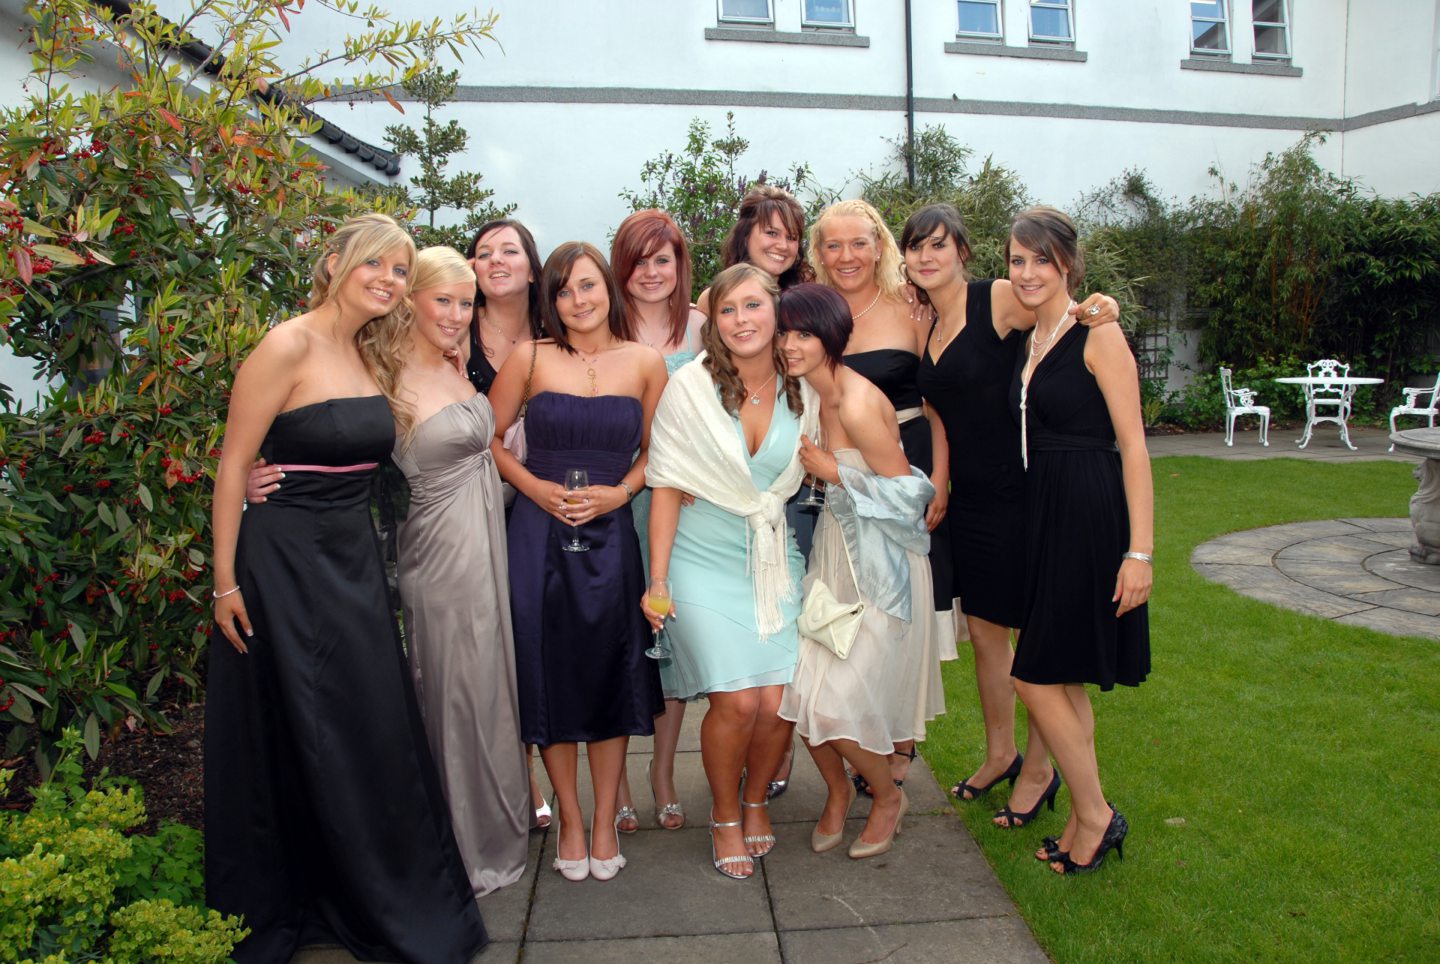 Girls at their prom in 2007.